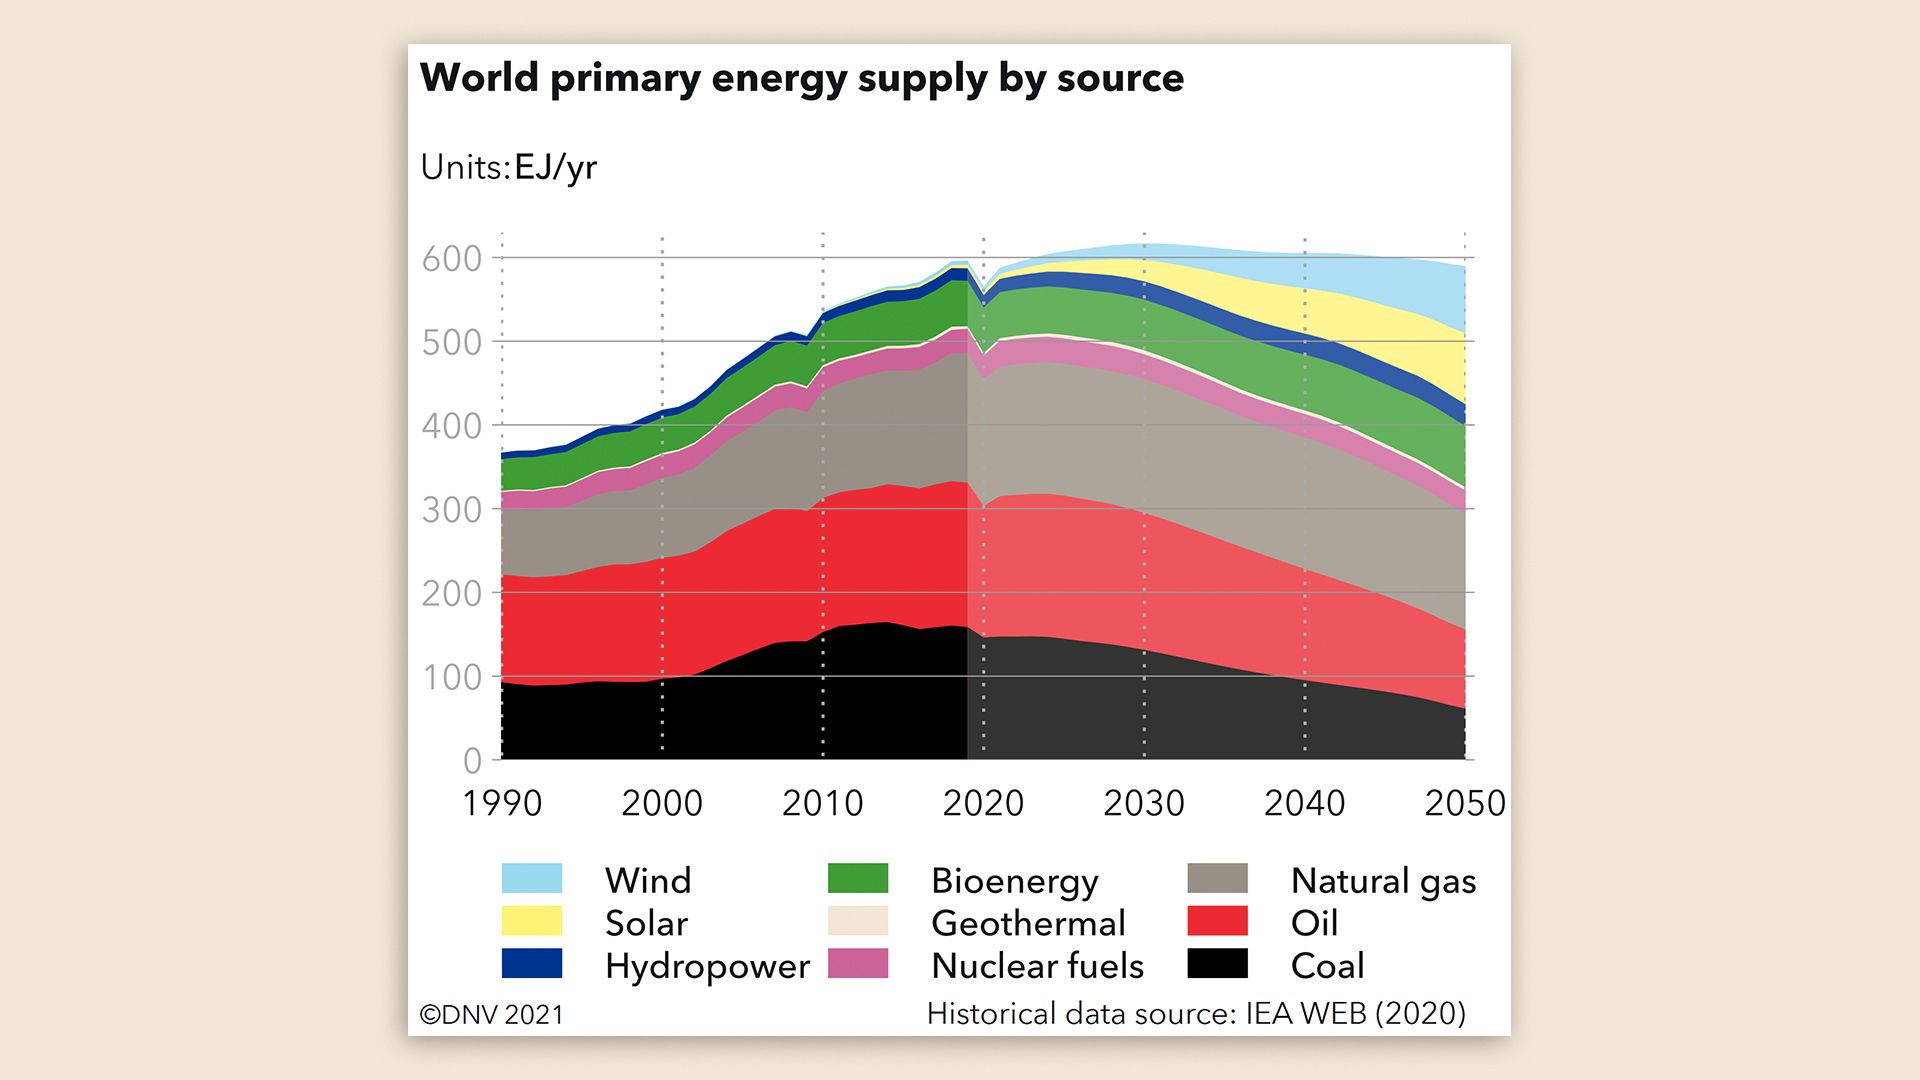 Projected global energy sources through 2050